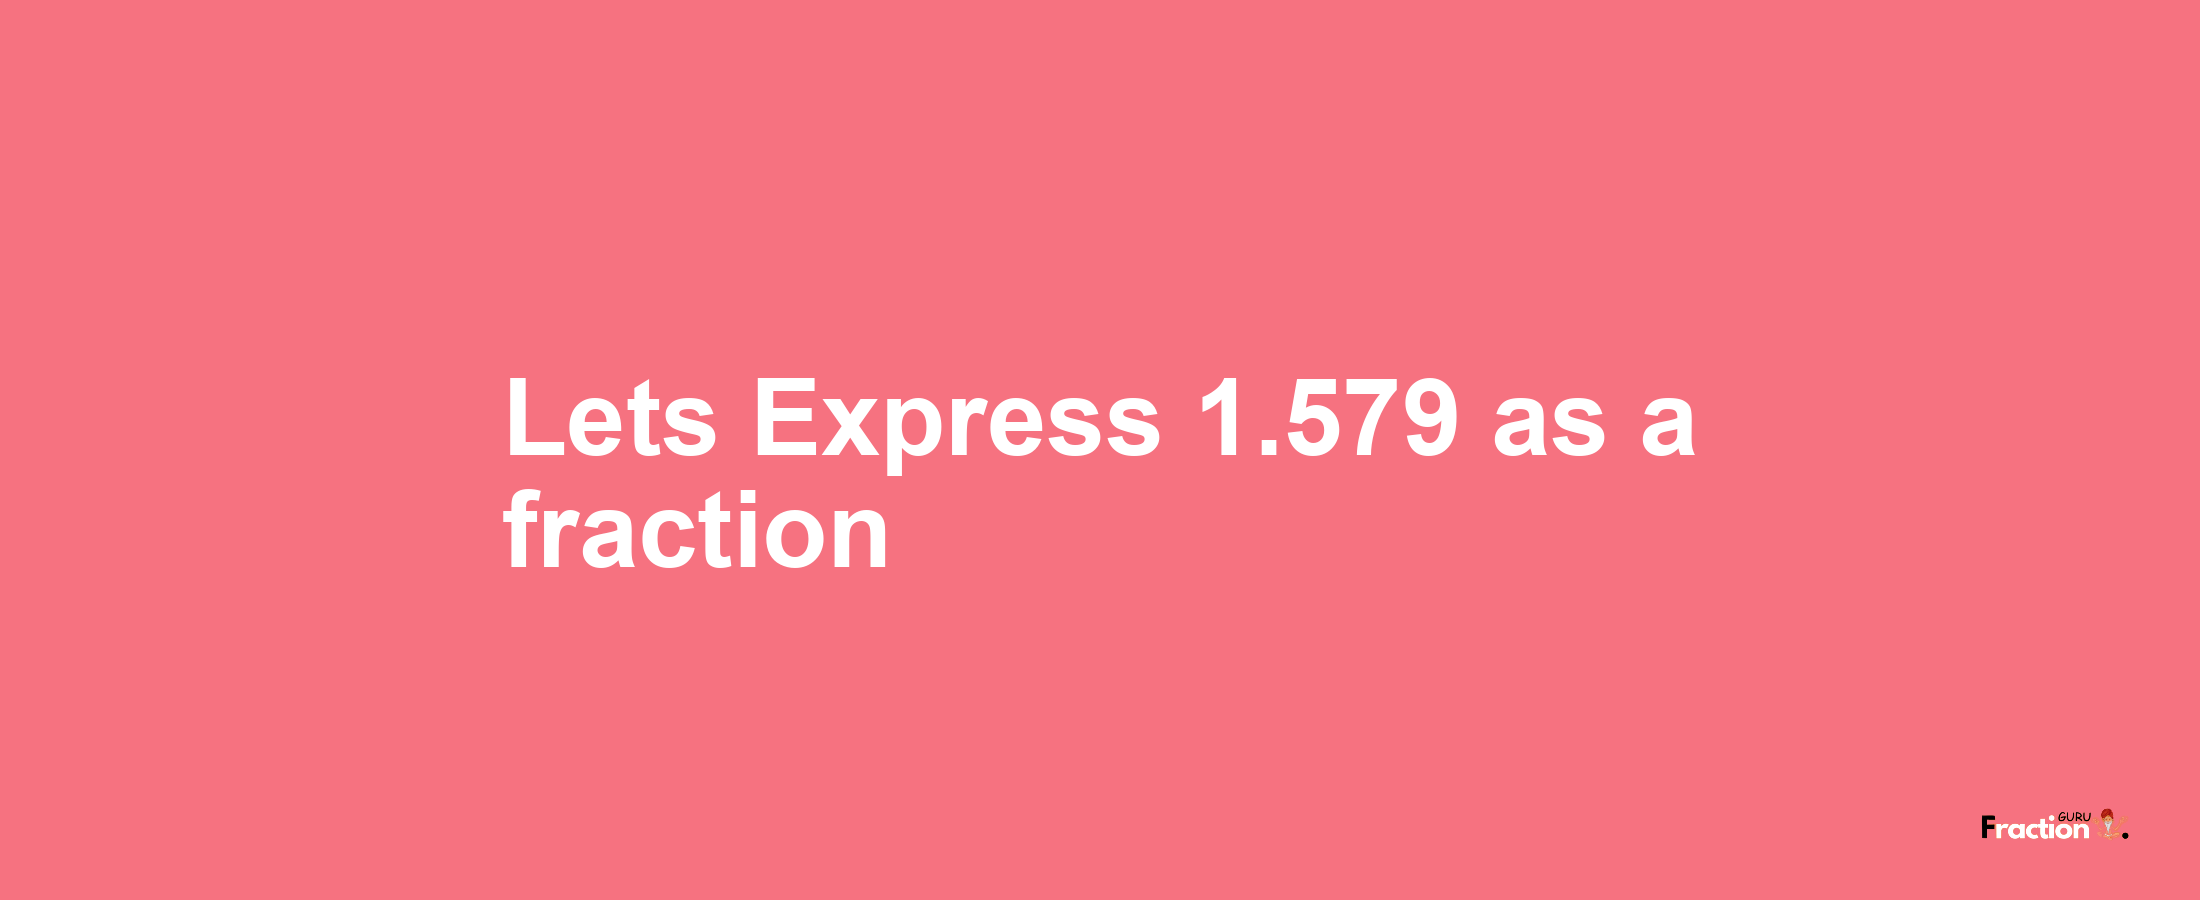 Lets Express 1.579 as afraction